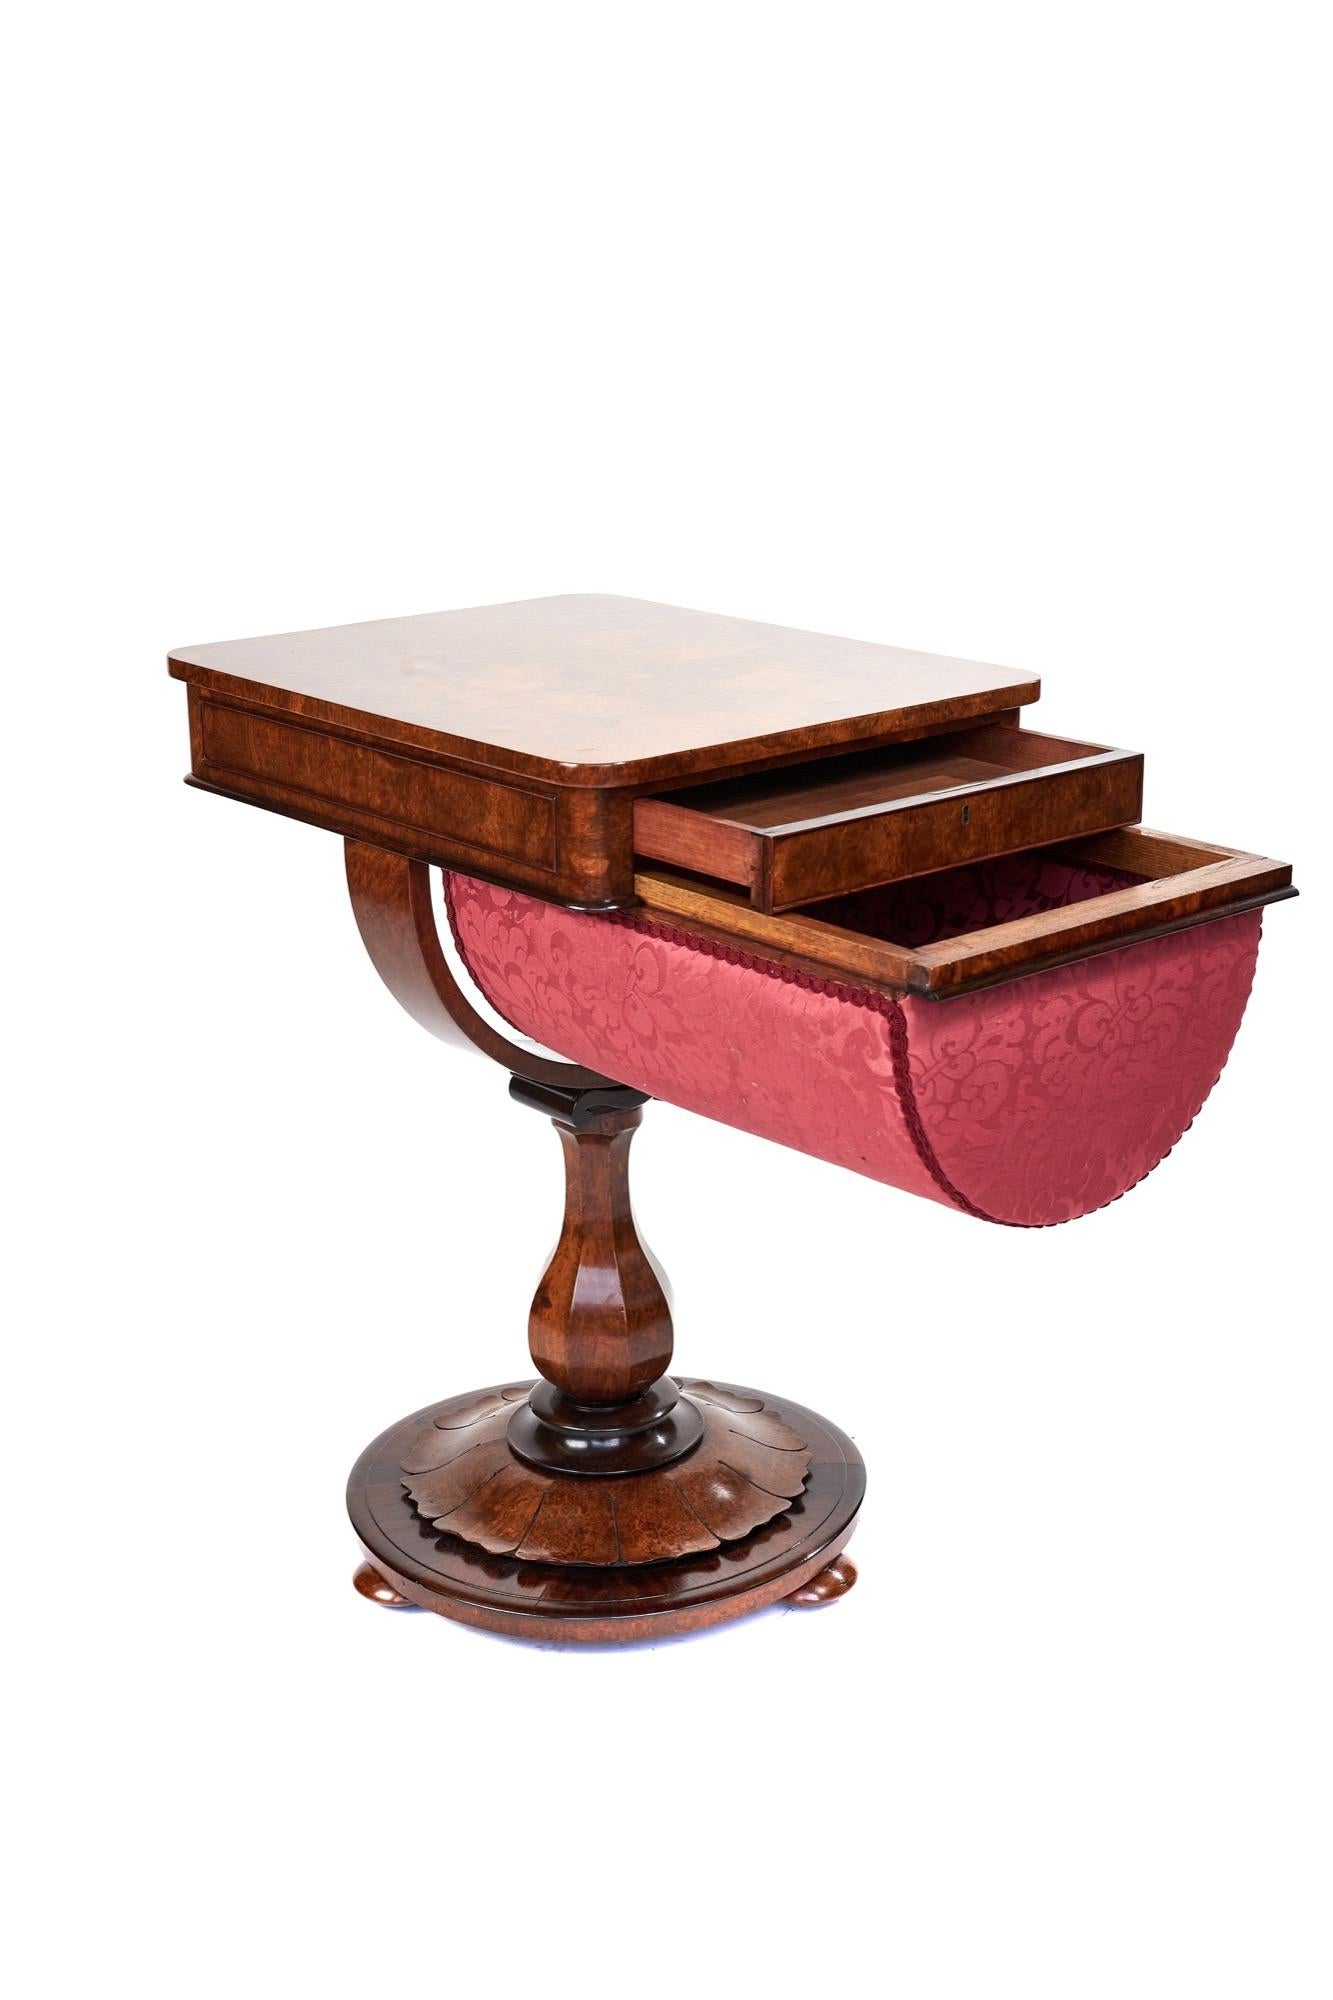 Fine antique Victorian burr walnut work table having a marvelous burr walnut top, a single drawer to the side and a half moon shaped sewing drawer covered in a pretty pink floral material, half-moon burr walnut support beneath and a burr walnut